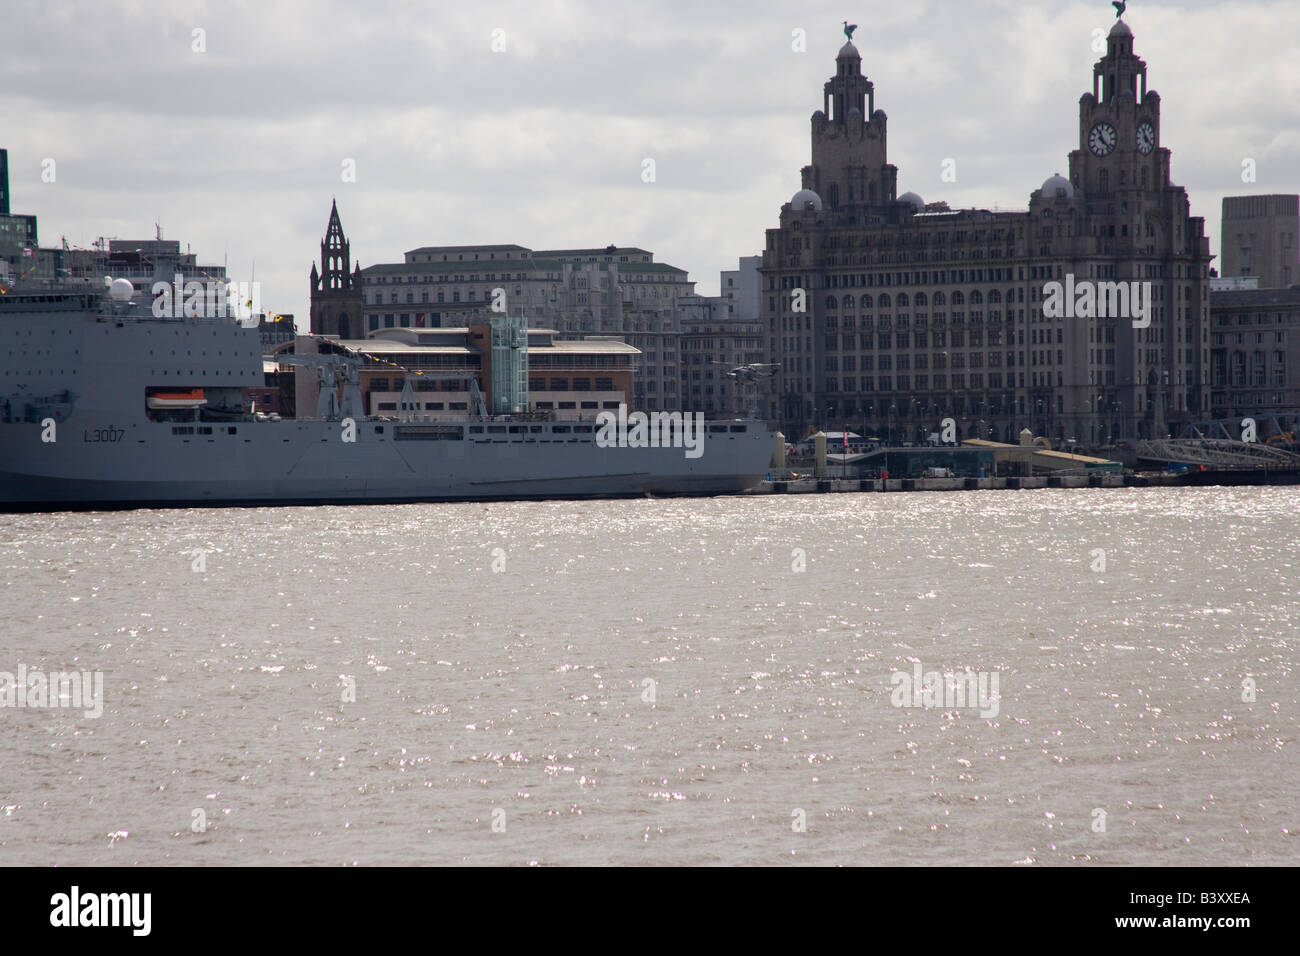 Royal Fleet Auxiliary landing ship dock Lyme Bay moored at Pier Head Liverpool as part of the Tall Ships Race in July 2008 Stock Photo